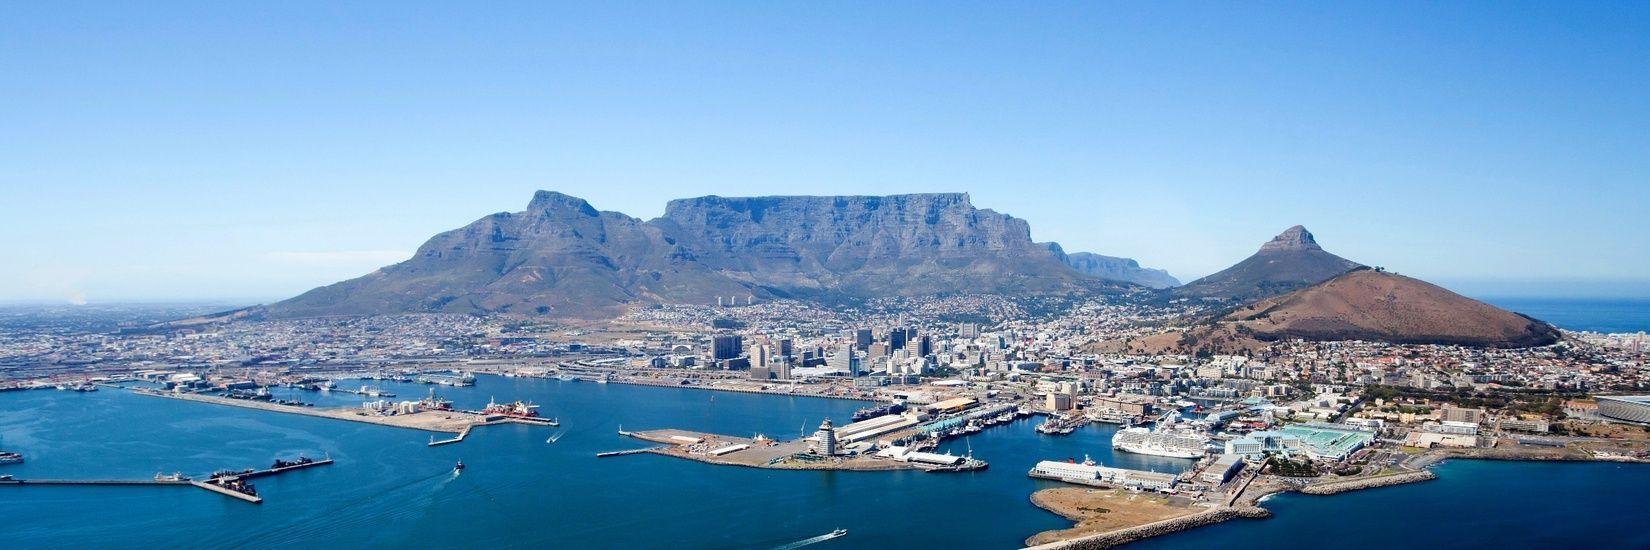 Table Mountain Wallpapers